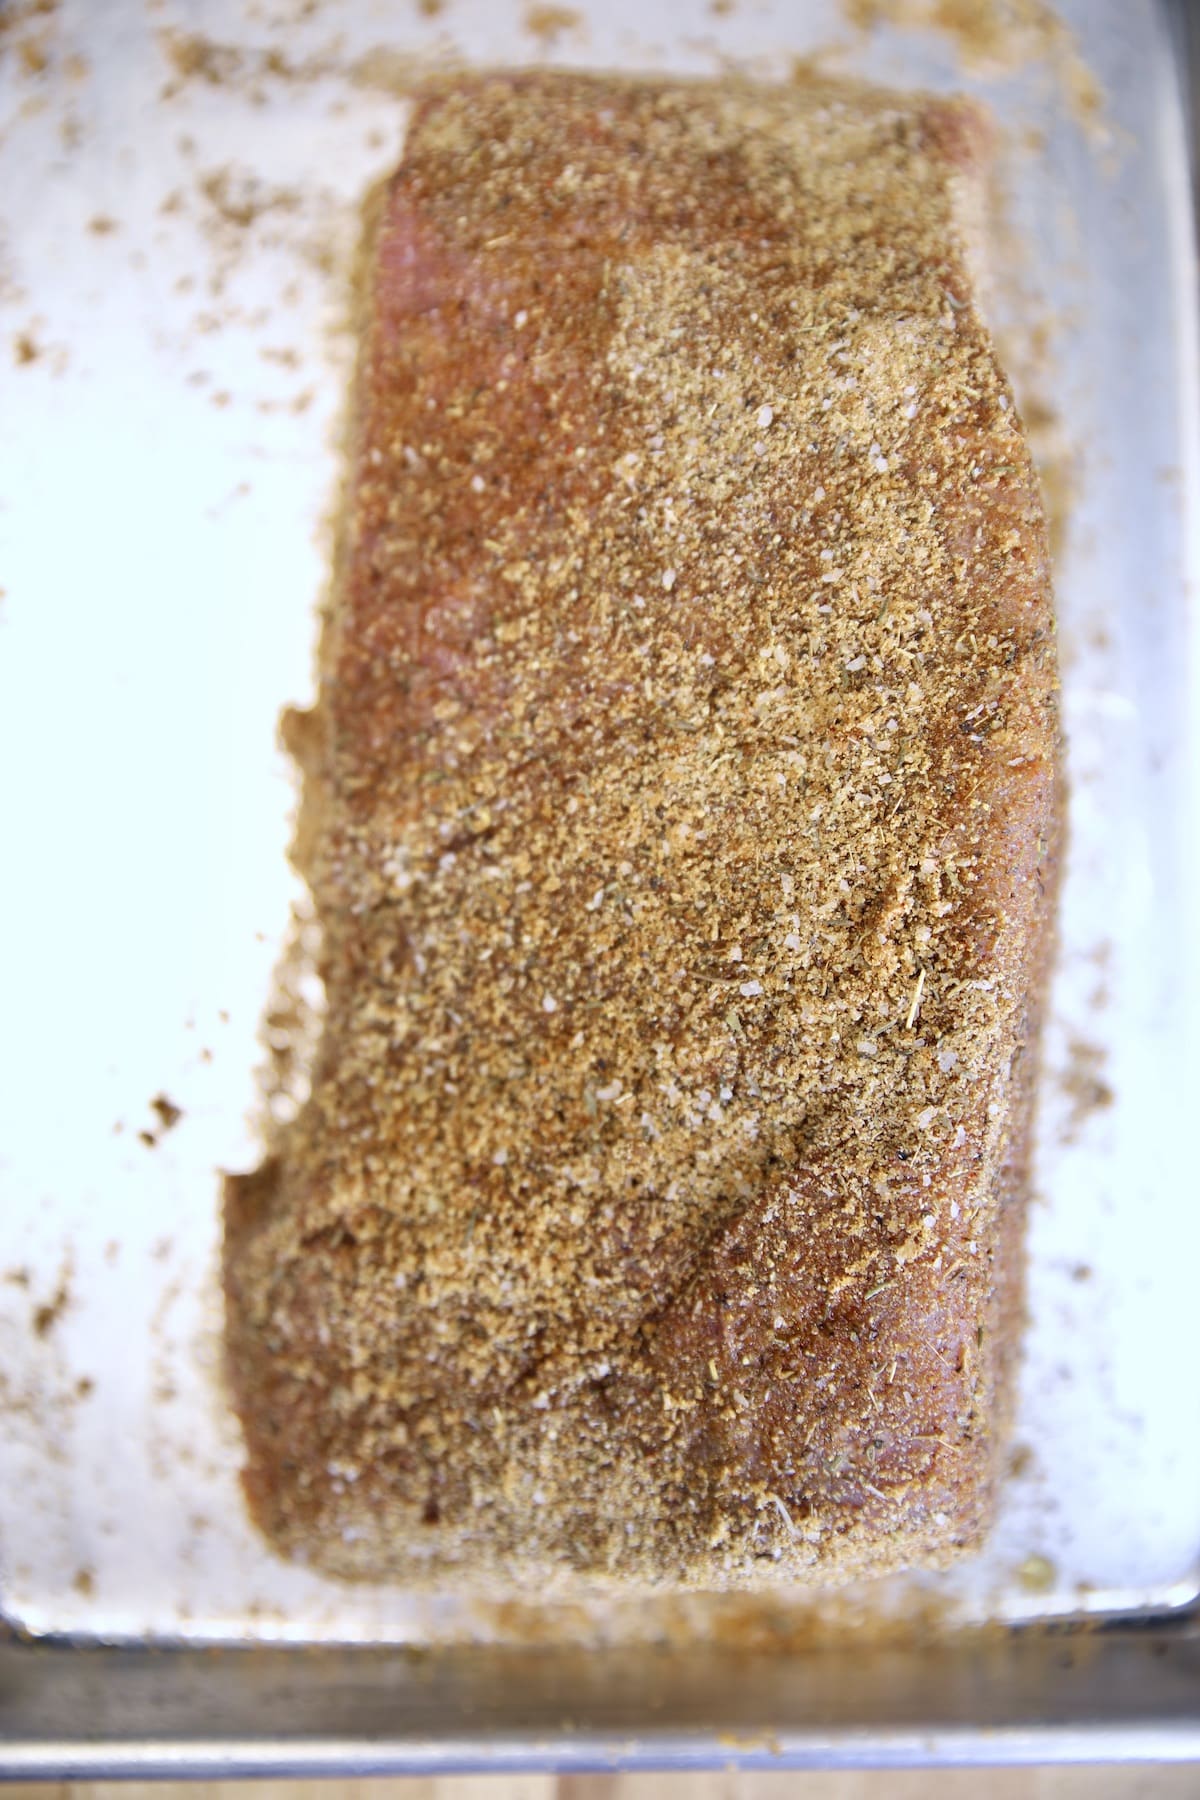 Top round roast with dry rub seasoning ready to grill.